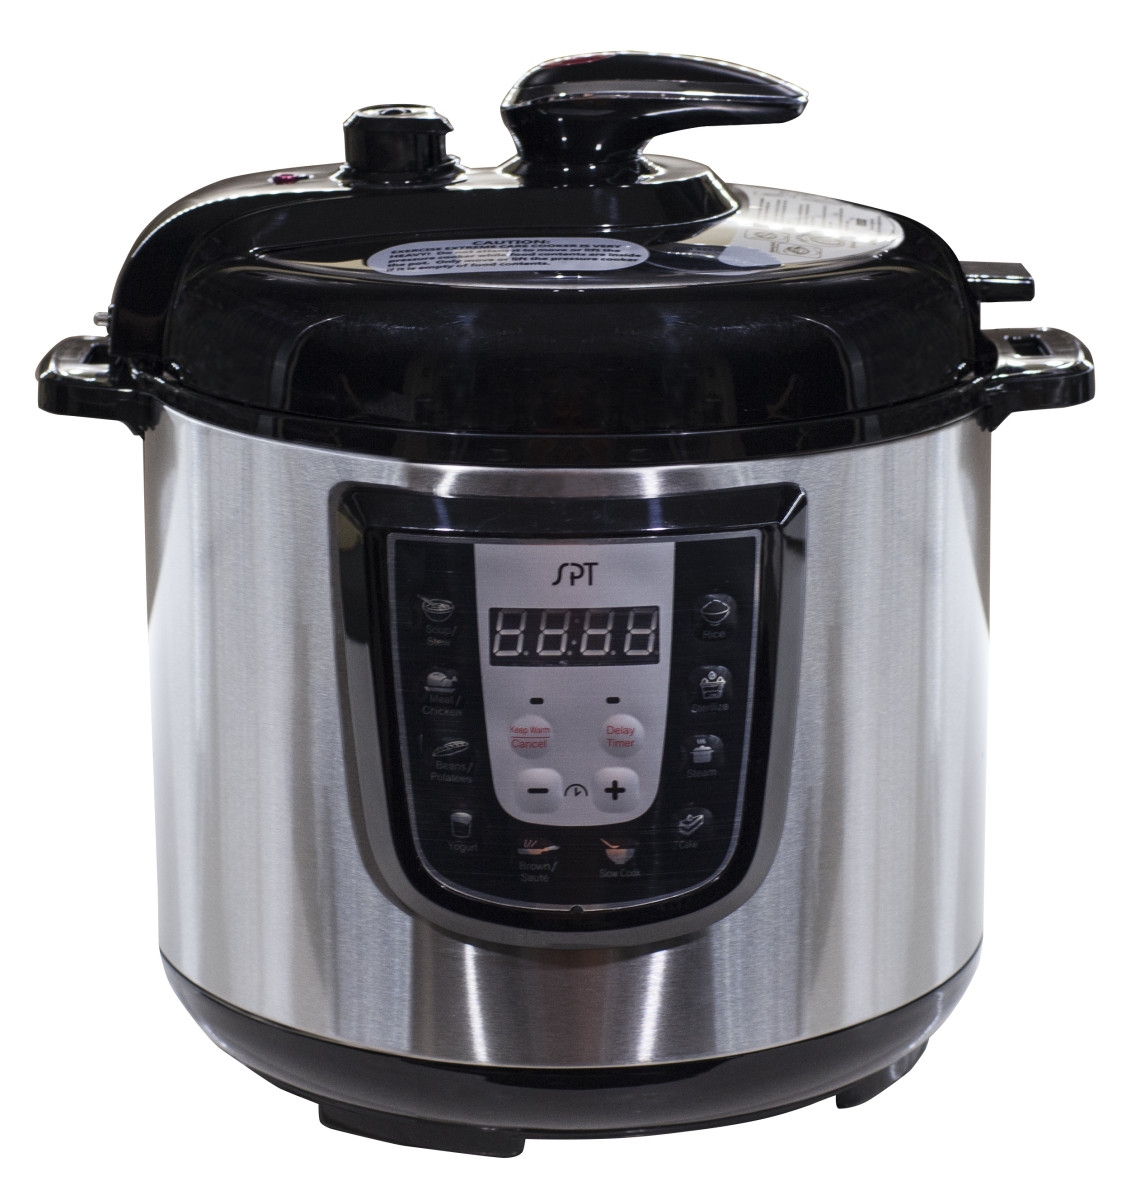 6 qt Electric Stainless Steel Pressure Cooker -  SPT, SP476311